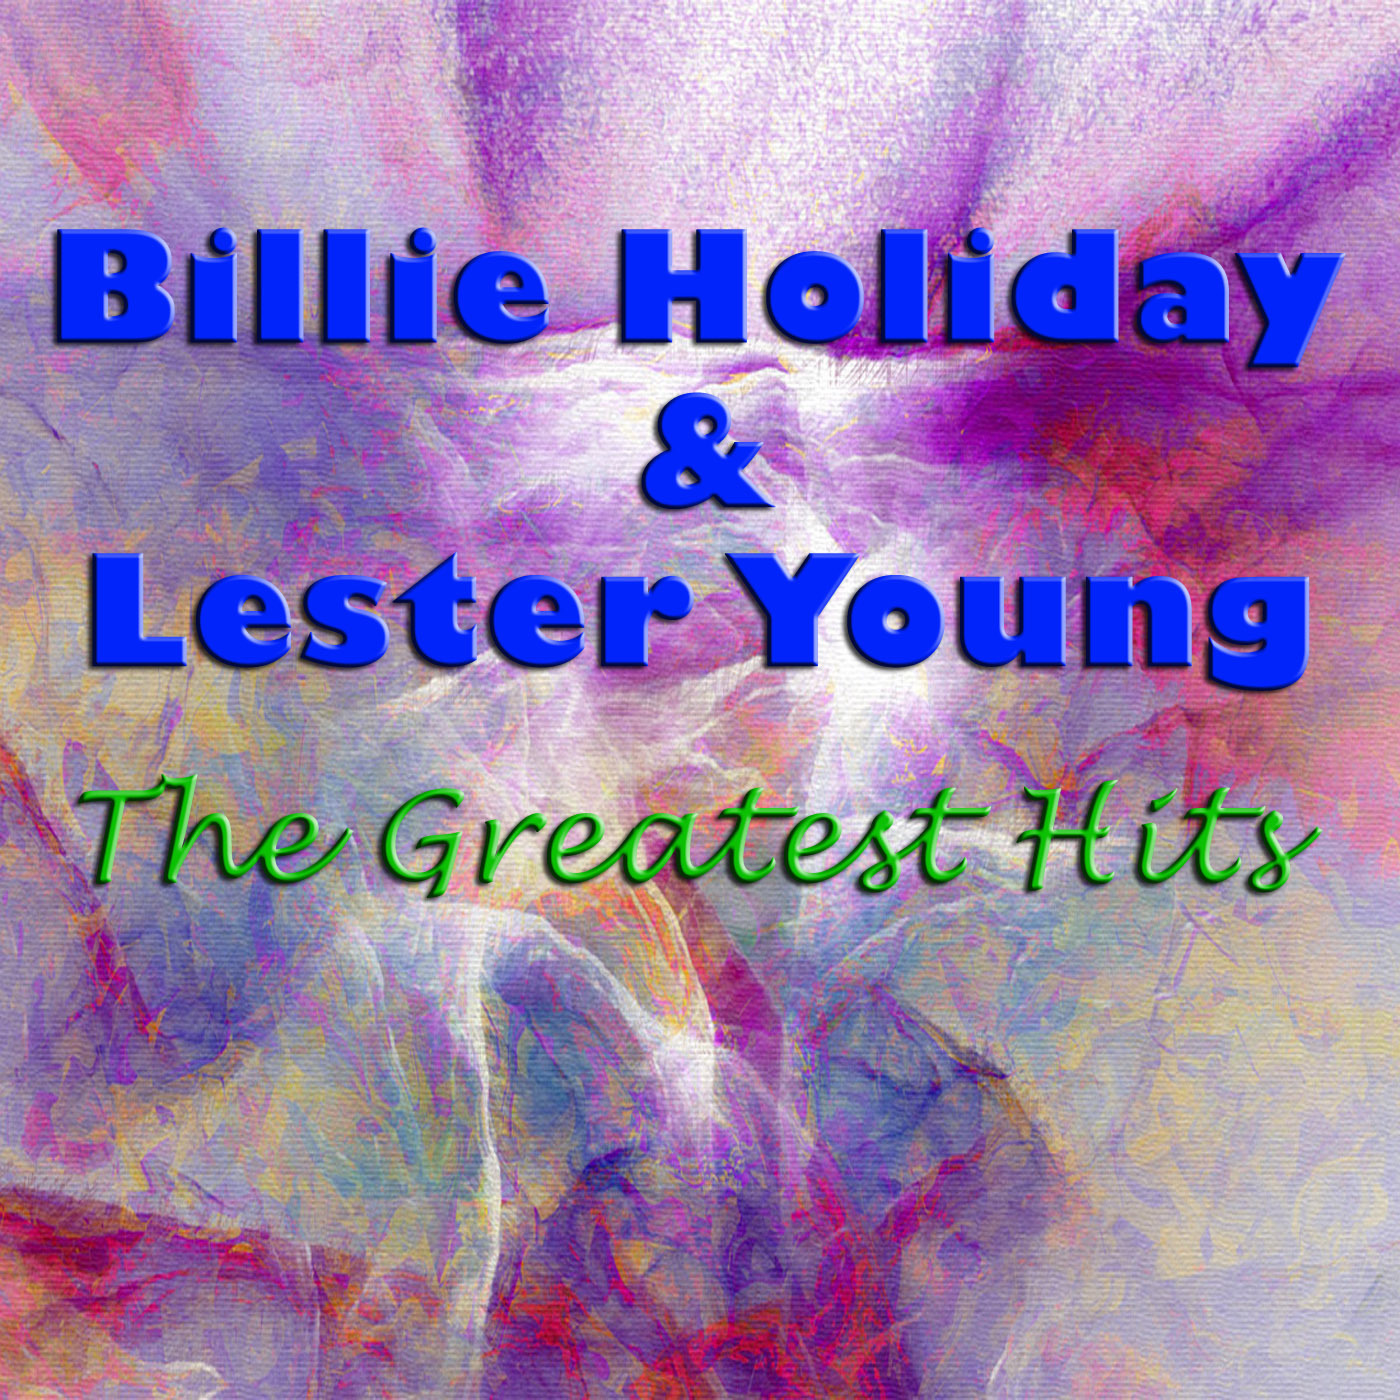 Billie Holiday & Lester Young: The Greatest Hits